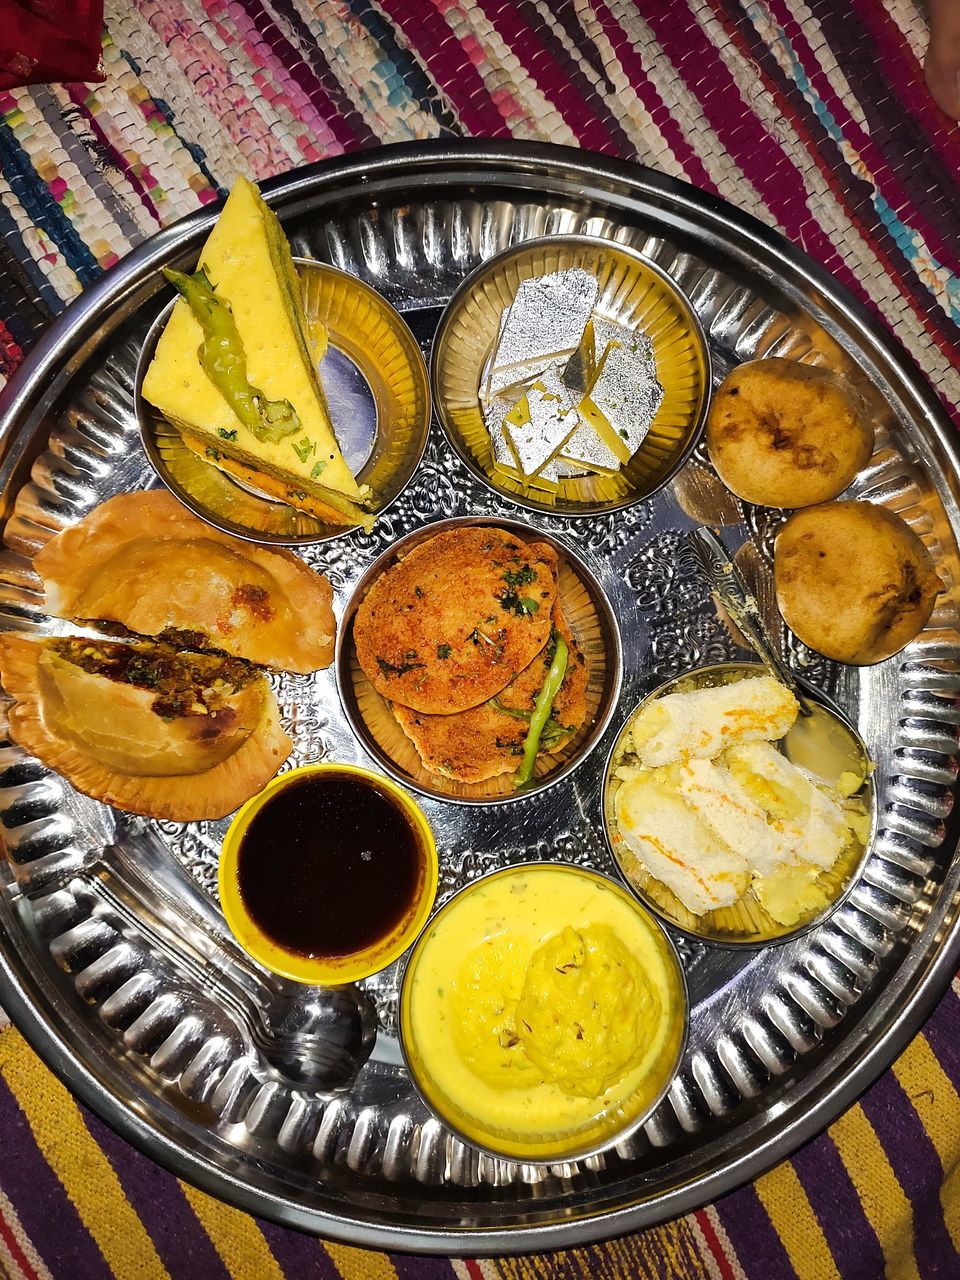 HIGH ANGLE VIEW OF FRUITS IN PLATE